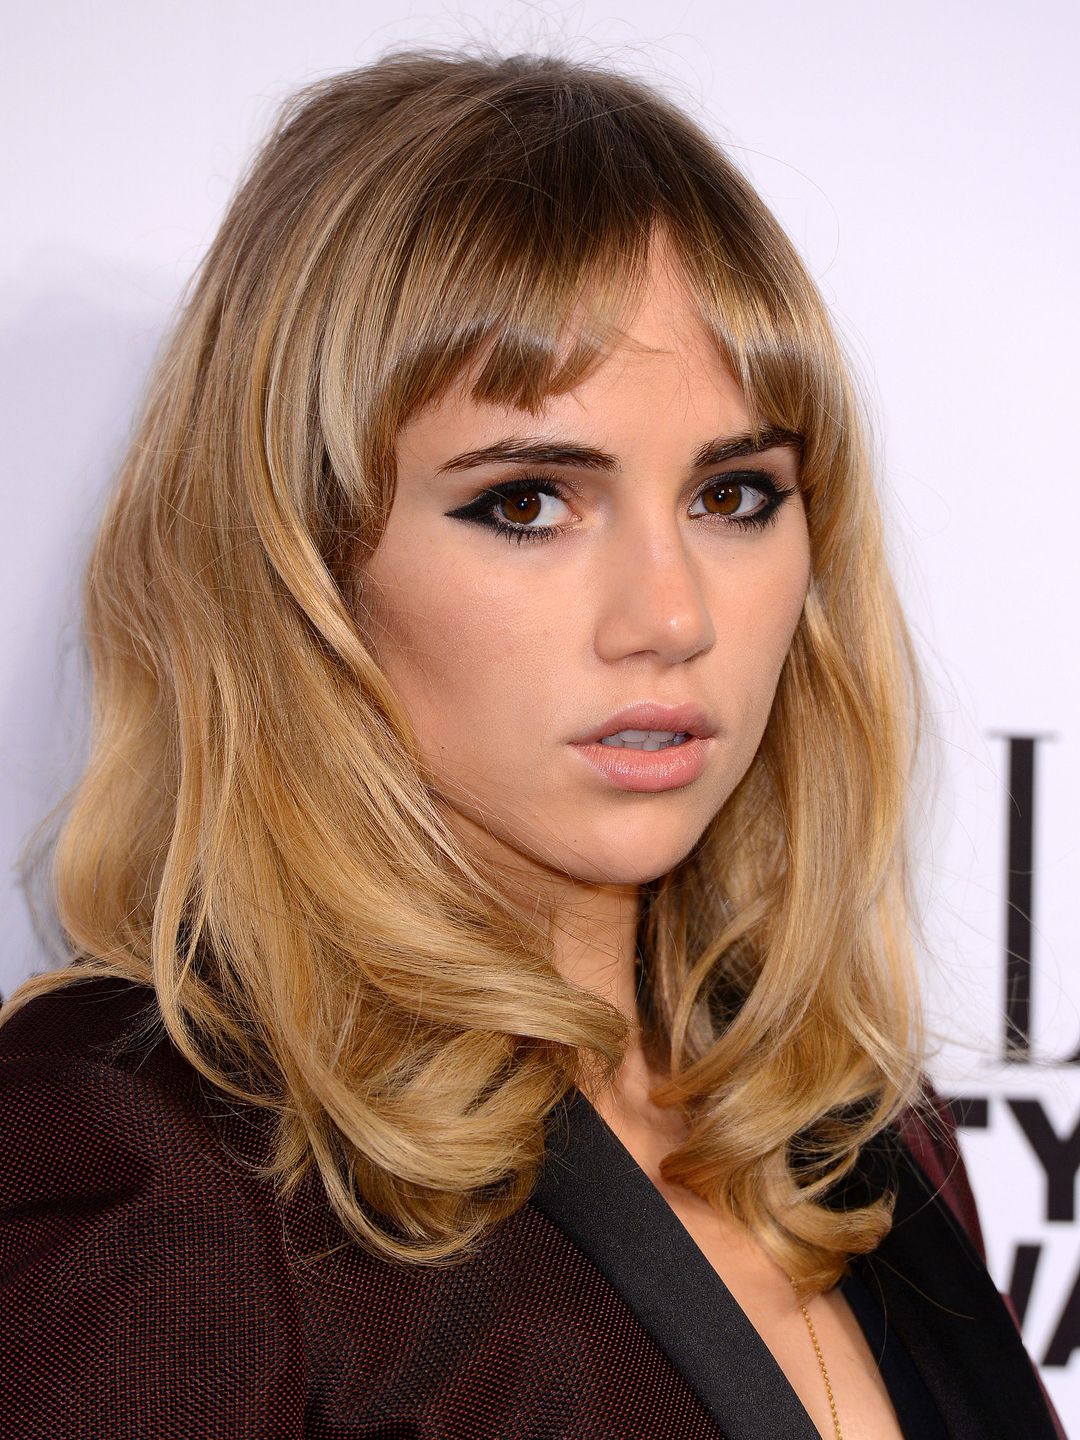 Suki Waterhouse who are her parents